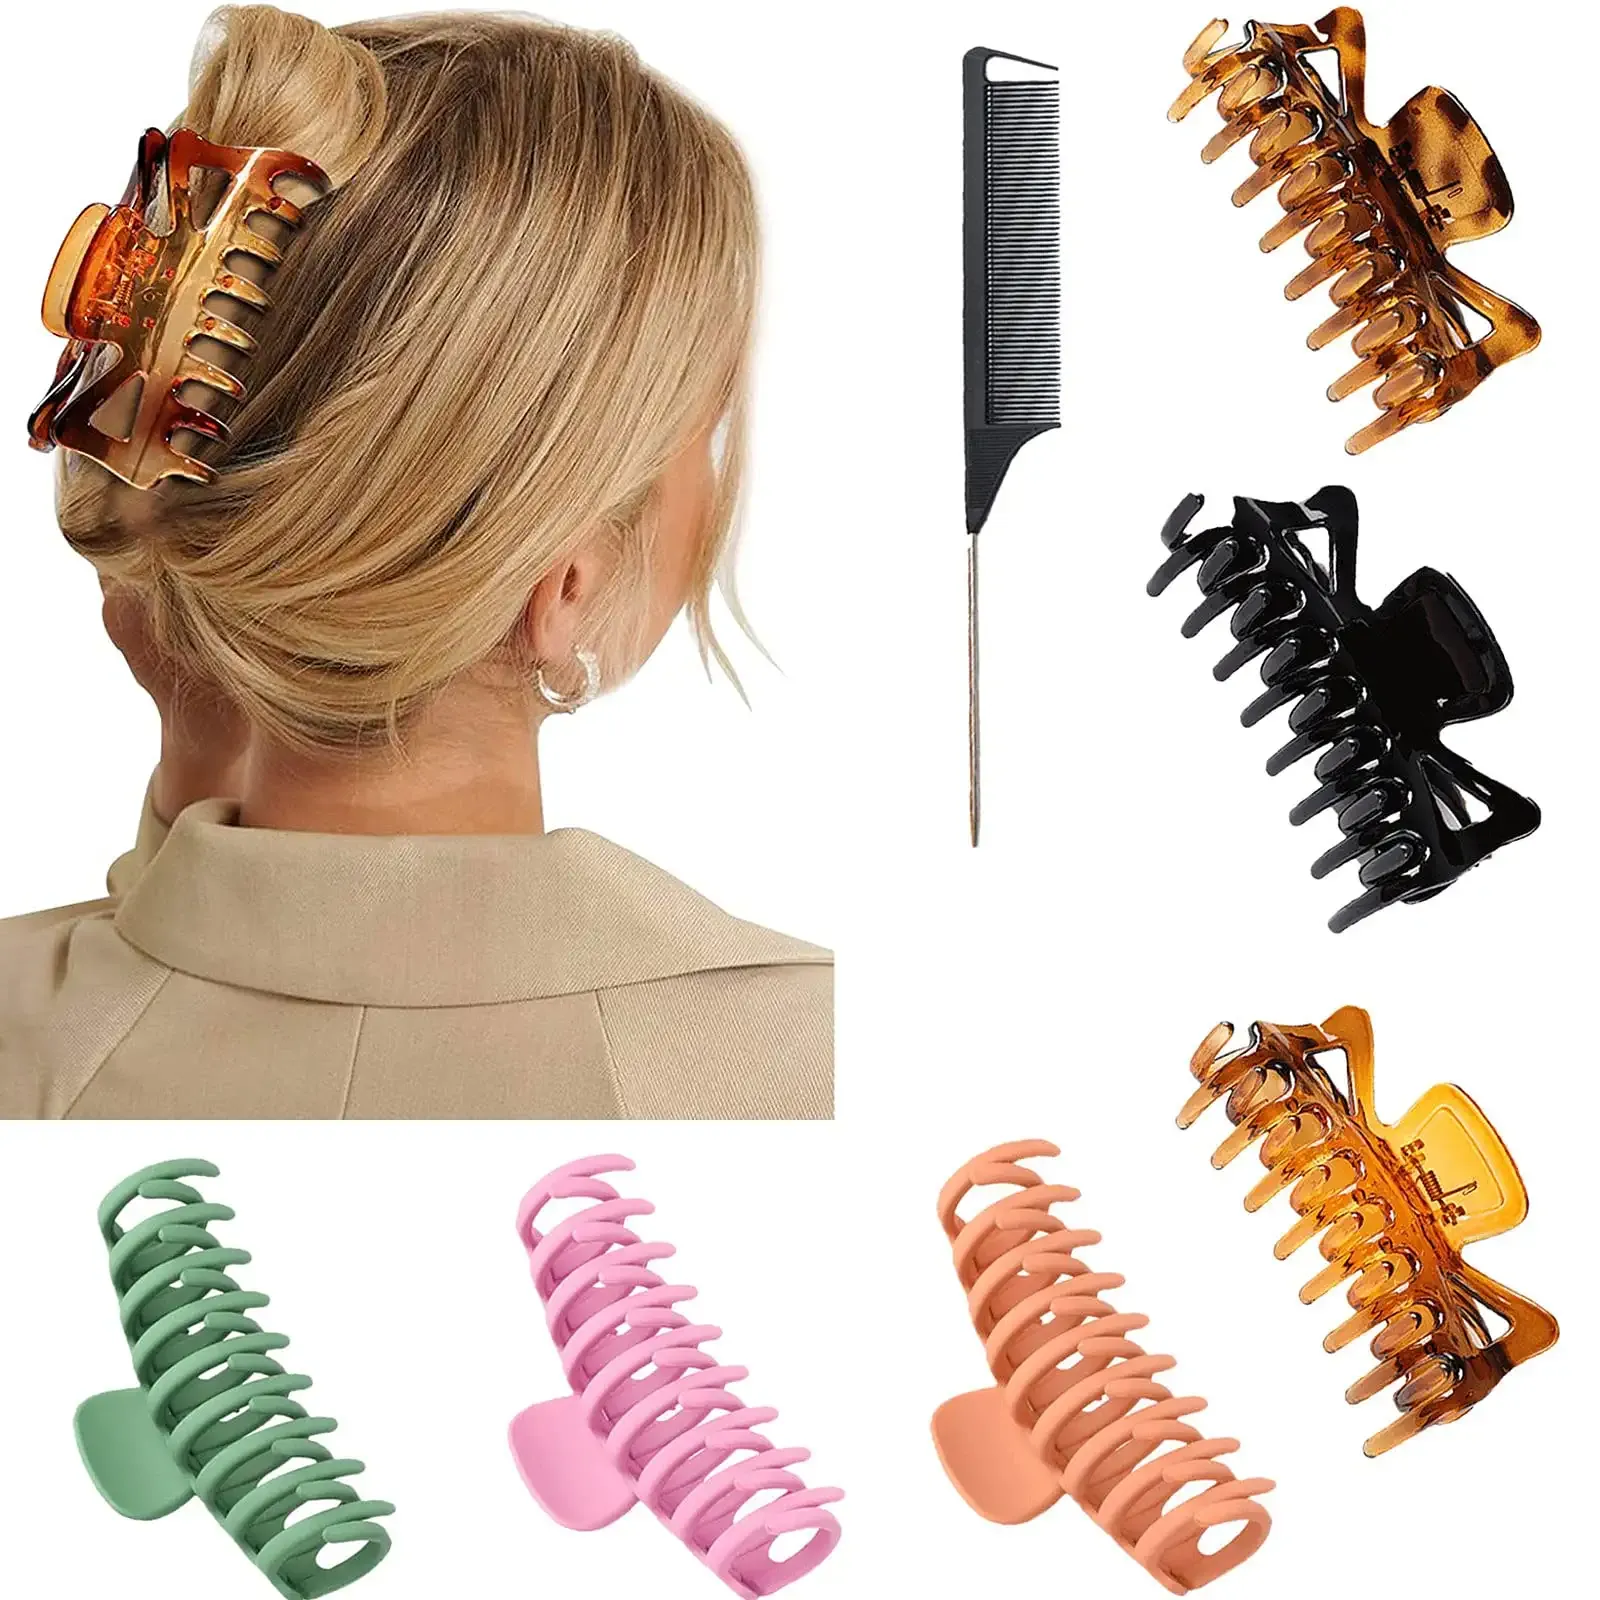 crown design large hair claw clips for women matte big hair claw for thick hair big banana clips for thin hair 4 2 claw clips strong nonslip for long curly hair styling accessories 12 color